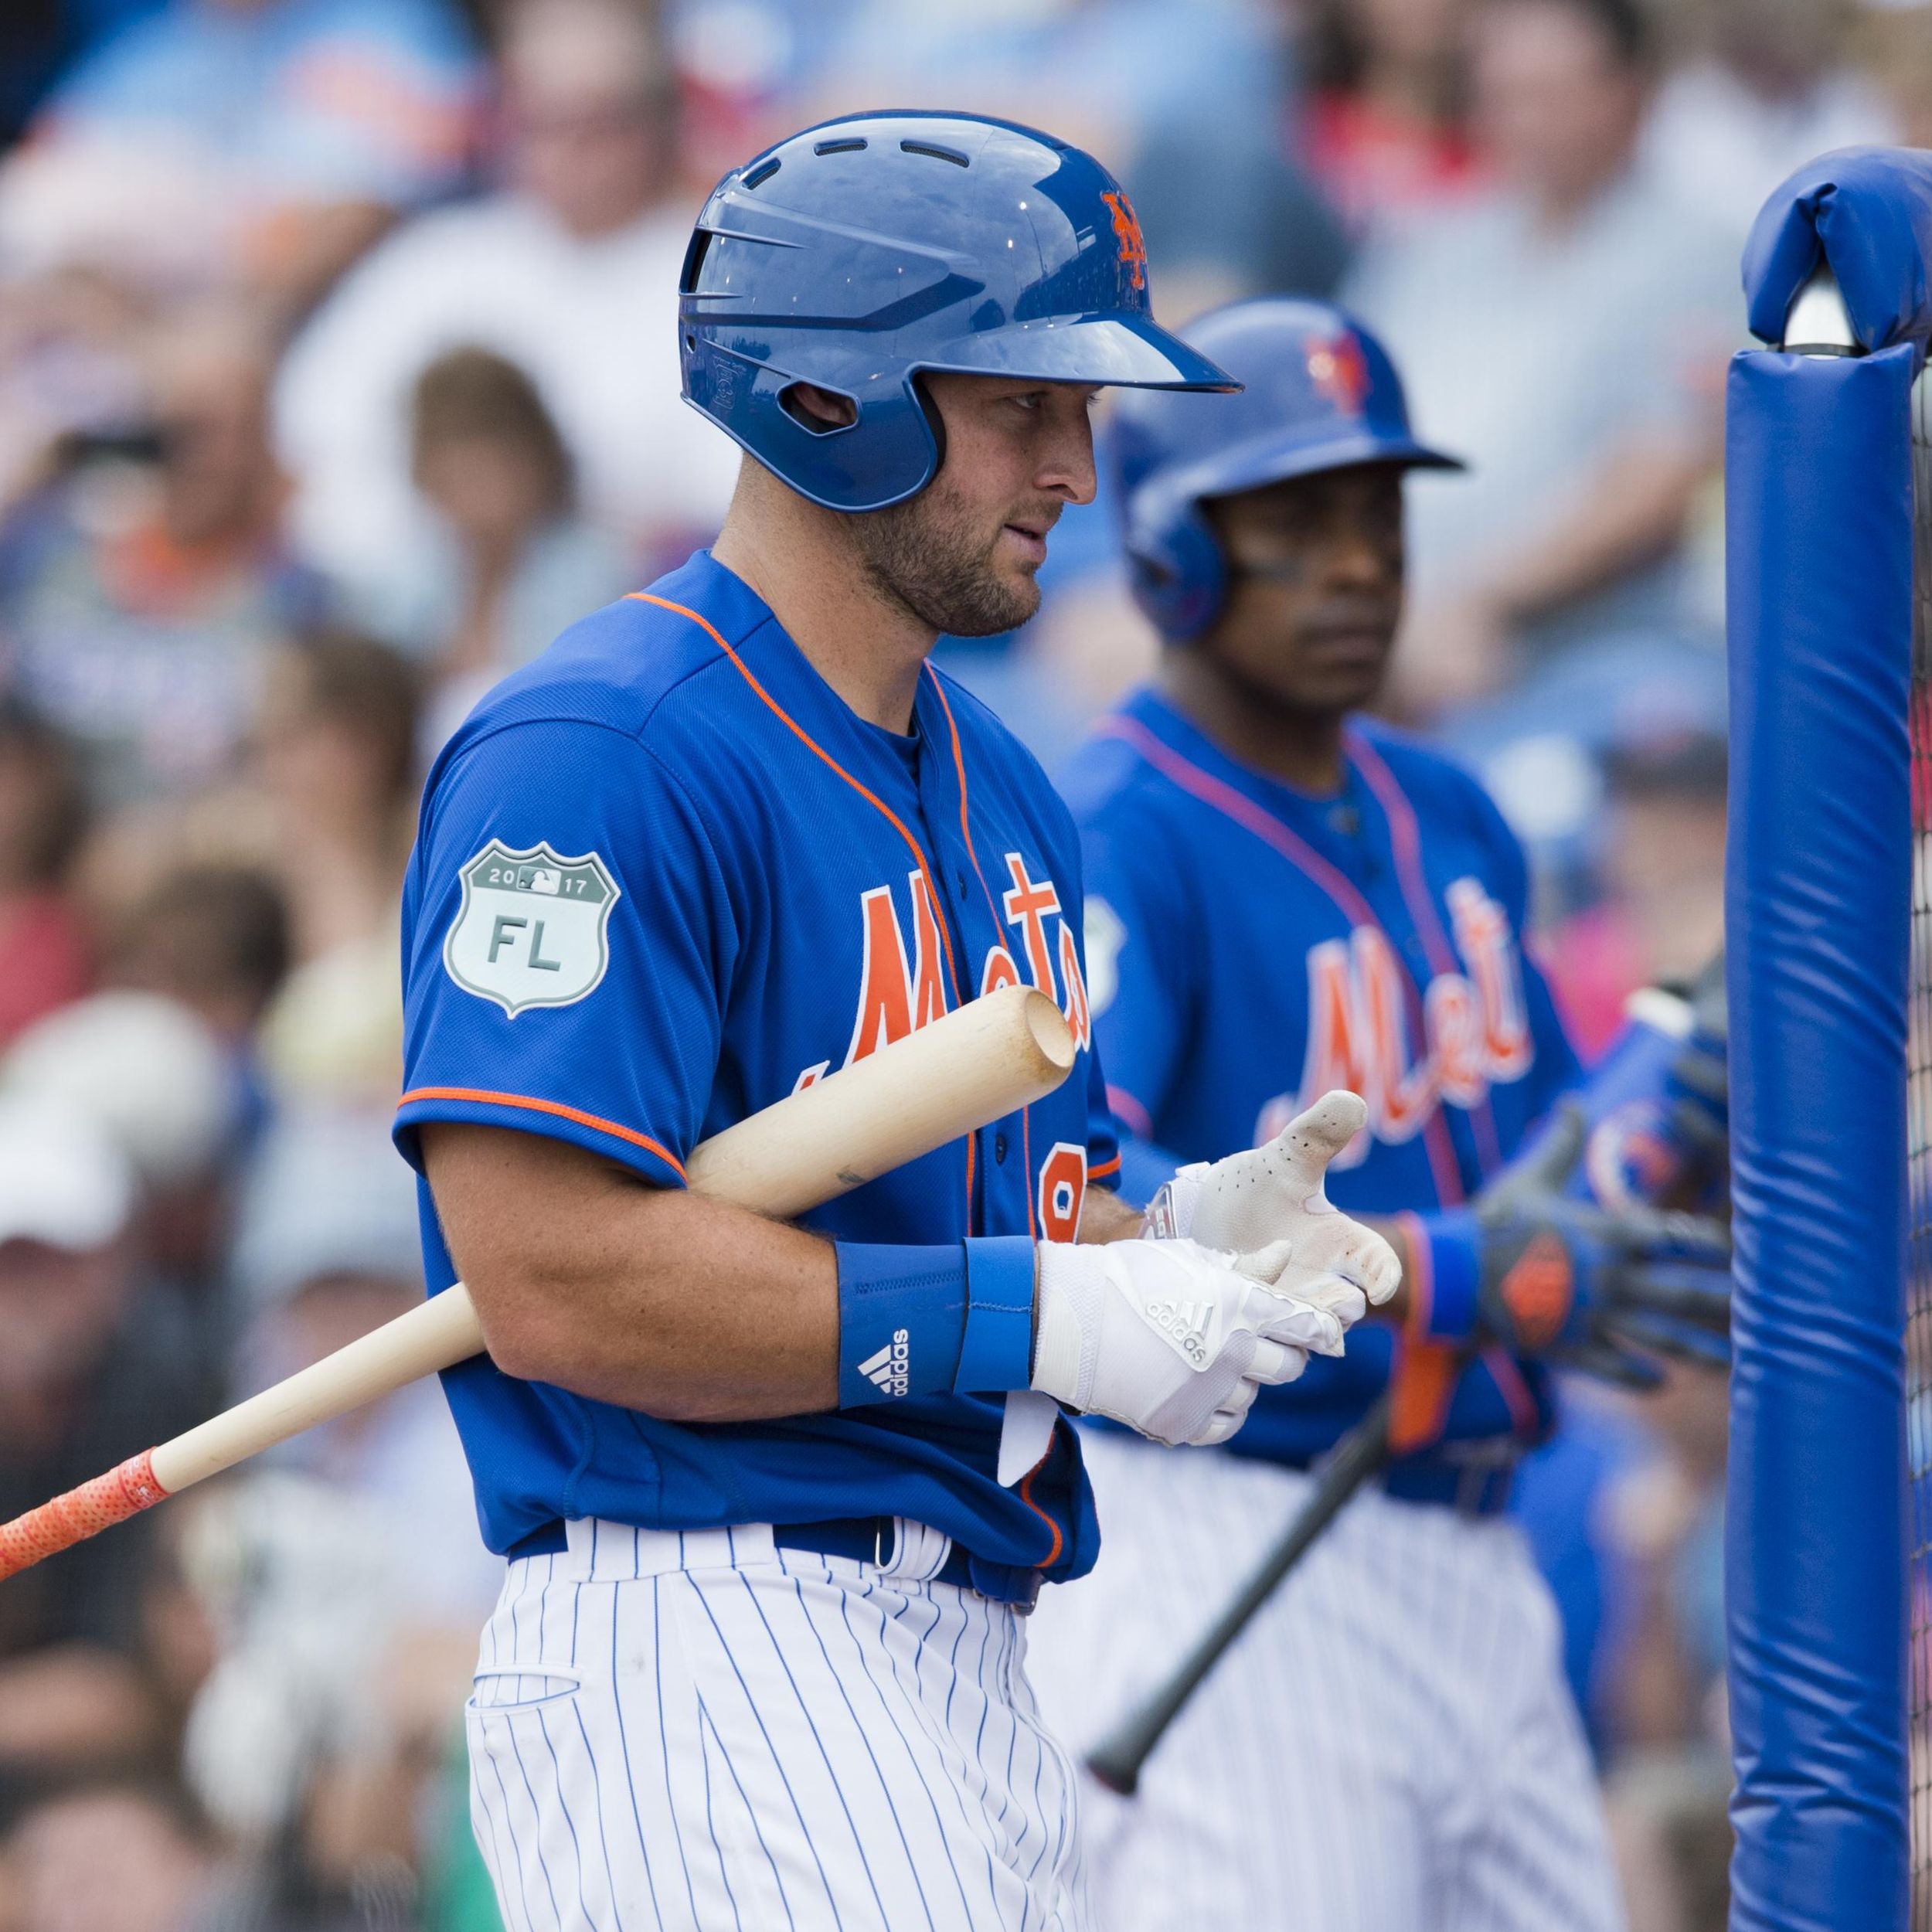 As Planned, Tim Tebow Joins Mets' Camp - The New York Times